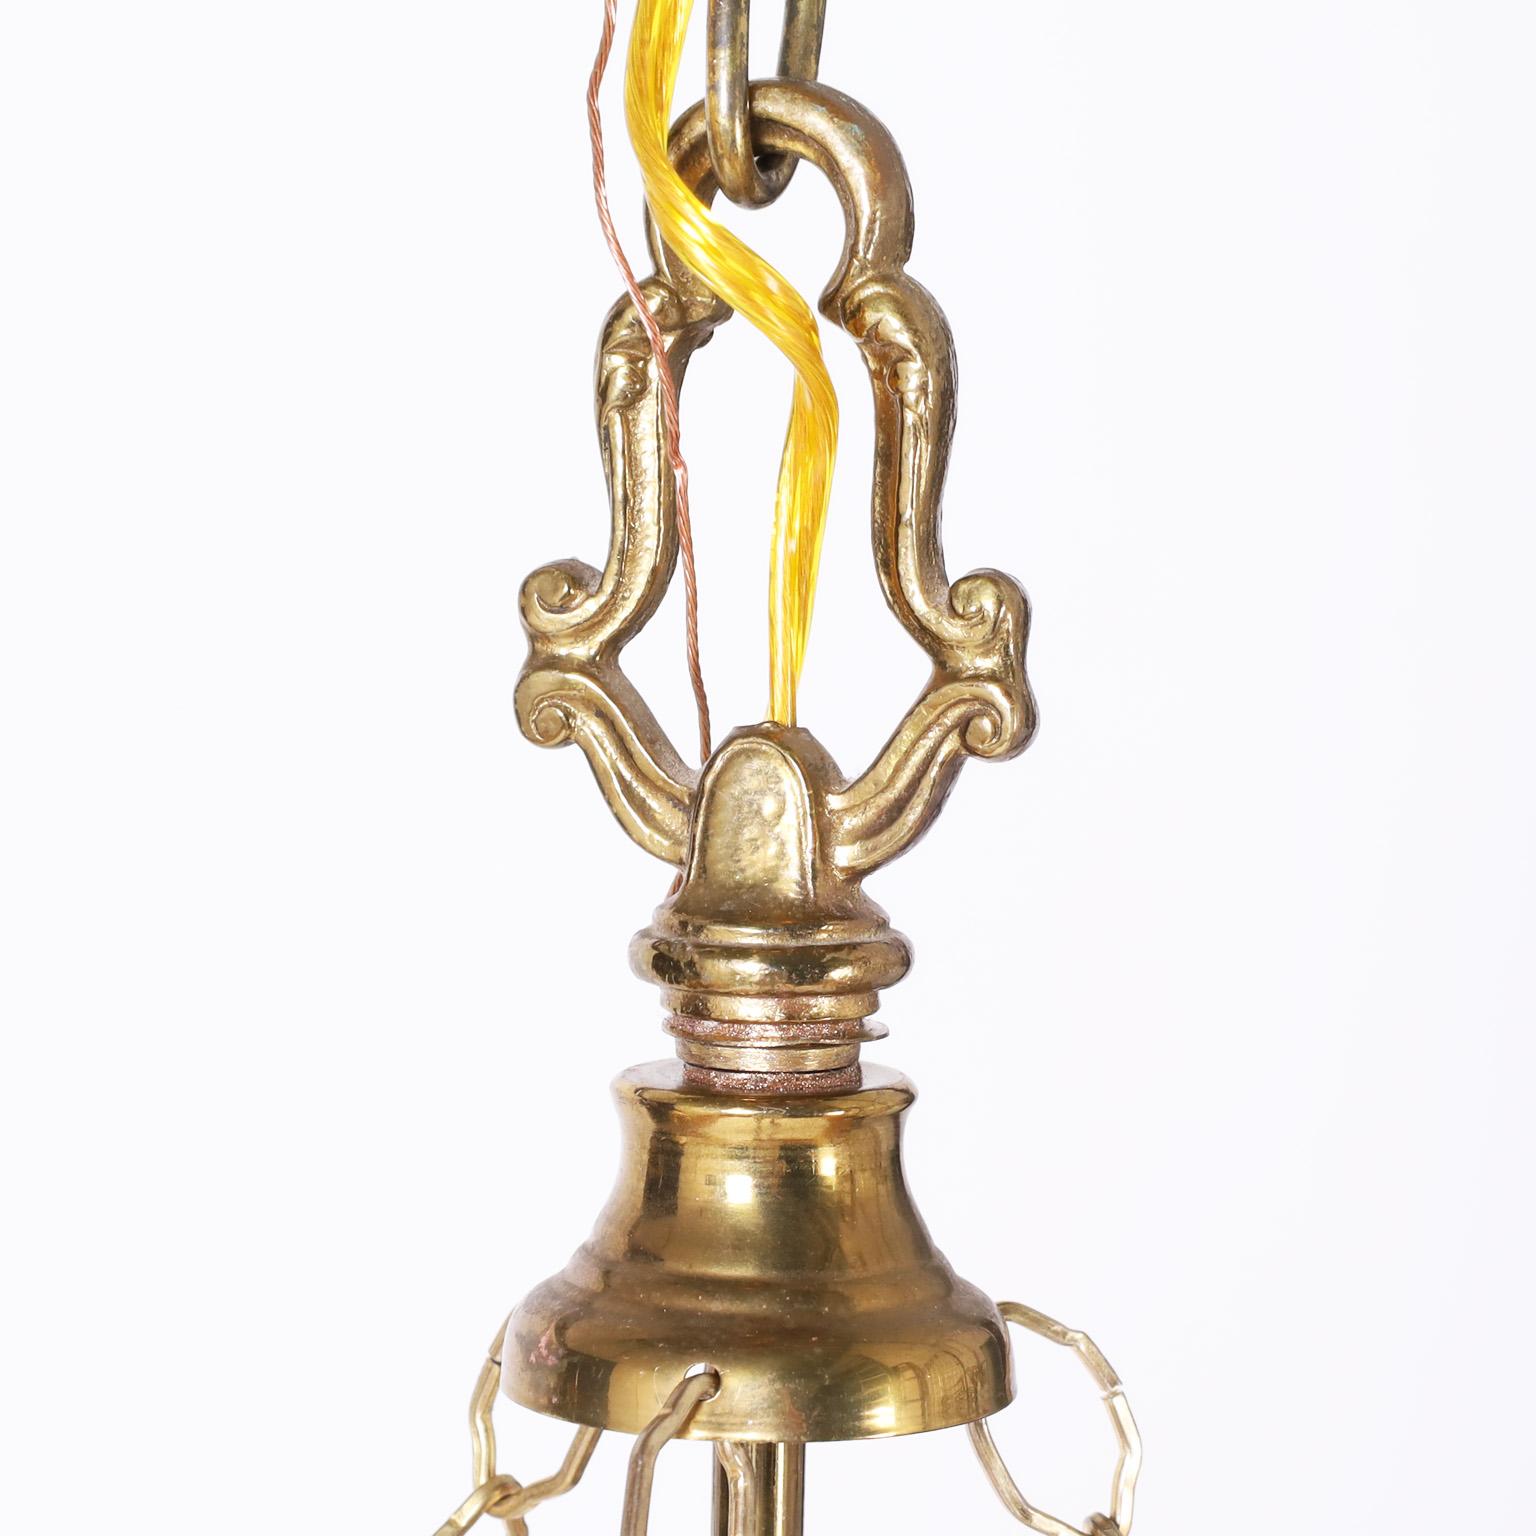 Vintage British colonial style three light lantern or light fixture with a hand blown glass bowl and brass hardware.